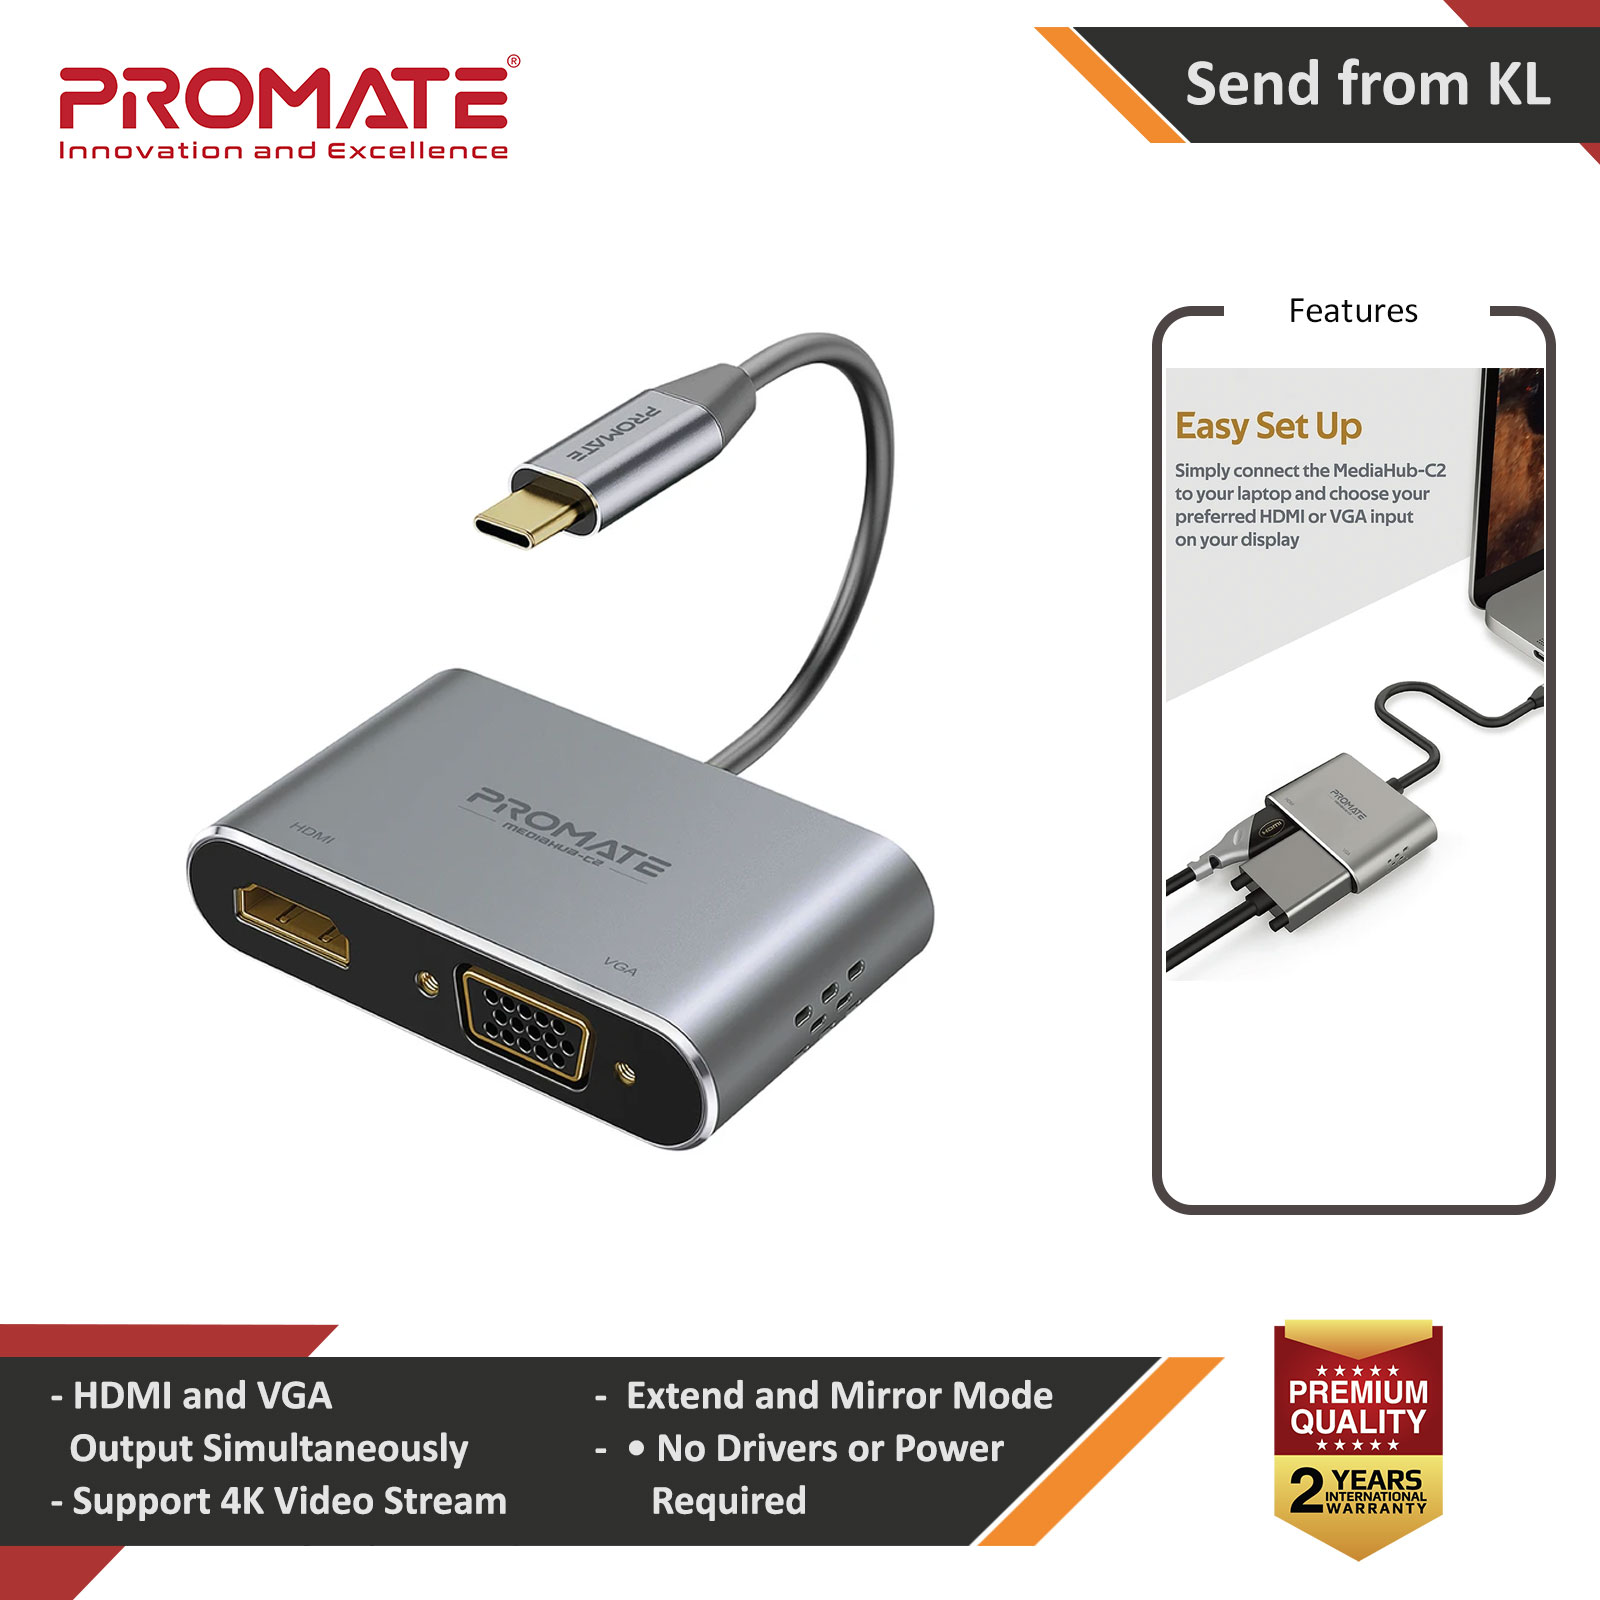 Picture of Promate USB-C to VGA and HDMI Adapter High Definition Aluminium USB-C to VGA HDMI Converter 4K Ultra HD Adapter with 1080 VGA and Dual Screen Display Support for Nintendo Switch MacBook Pro Macbook Air iPad Pro MediaHub-C2 Red Design- Red Design Cases, Red Design Covers, iPad Cases and a wide selection of Red Design Accessories in Malaysia, Sabah, Sarawak and Singapore 